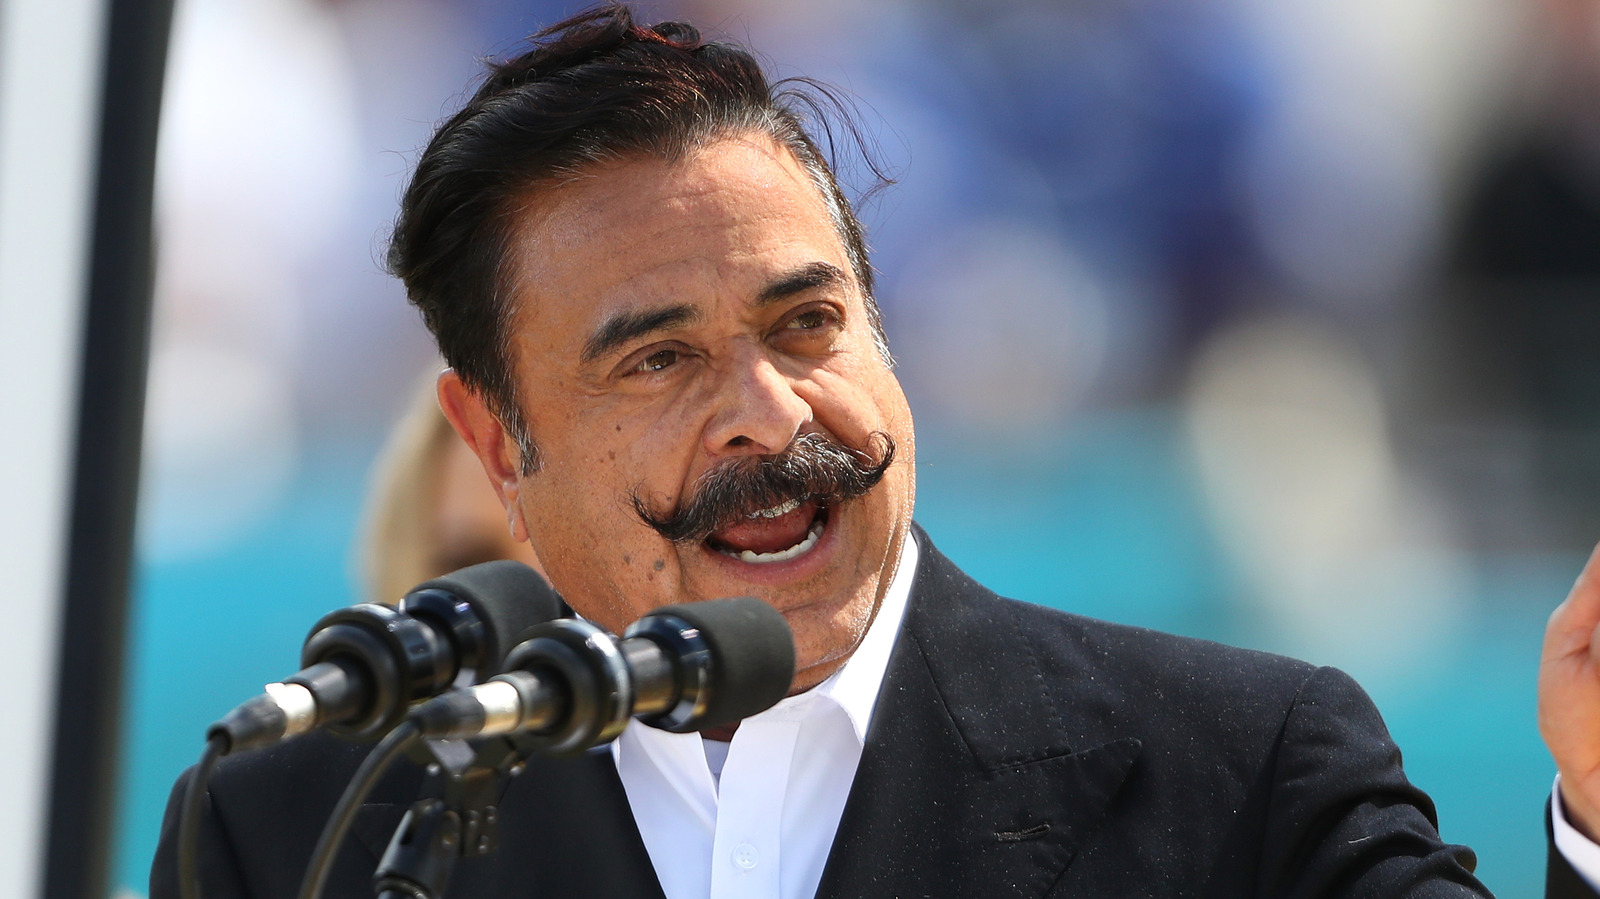 AEW Owner Shahid Khan Only Earned $1.20 An Hour For His First American Job